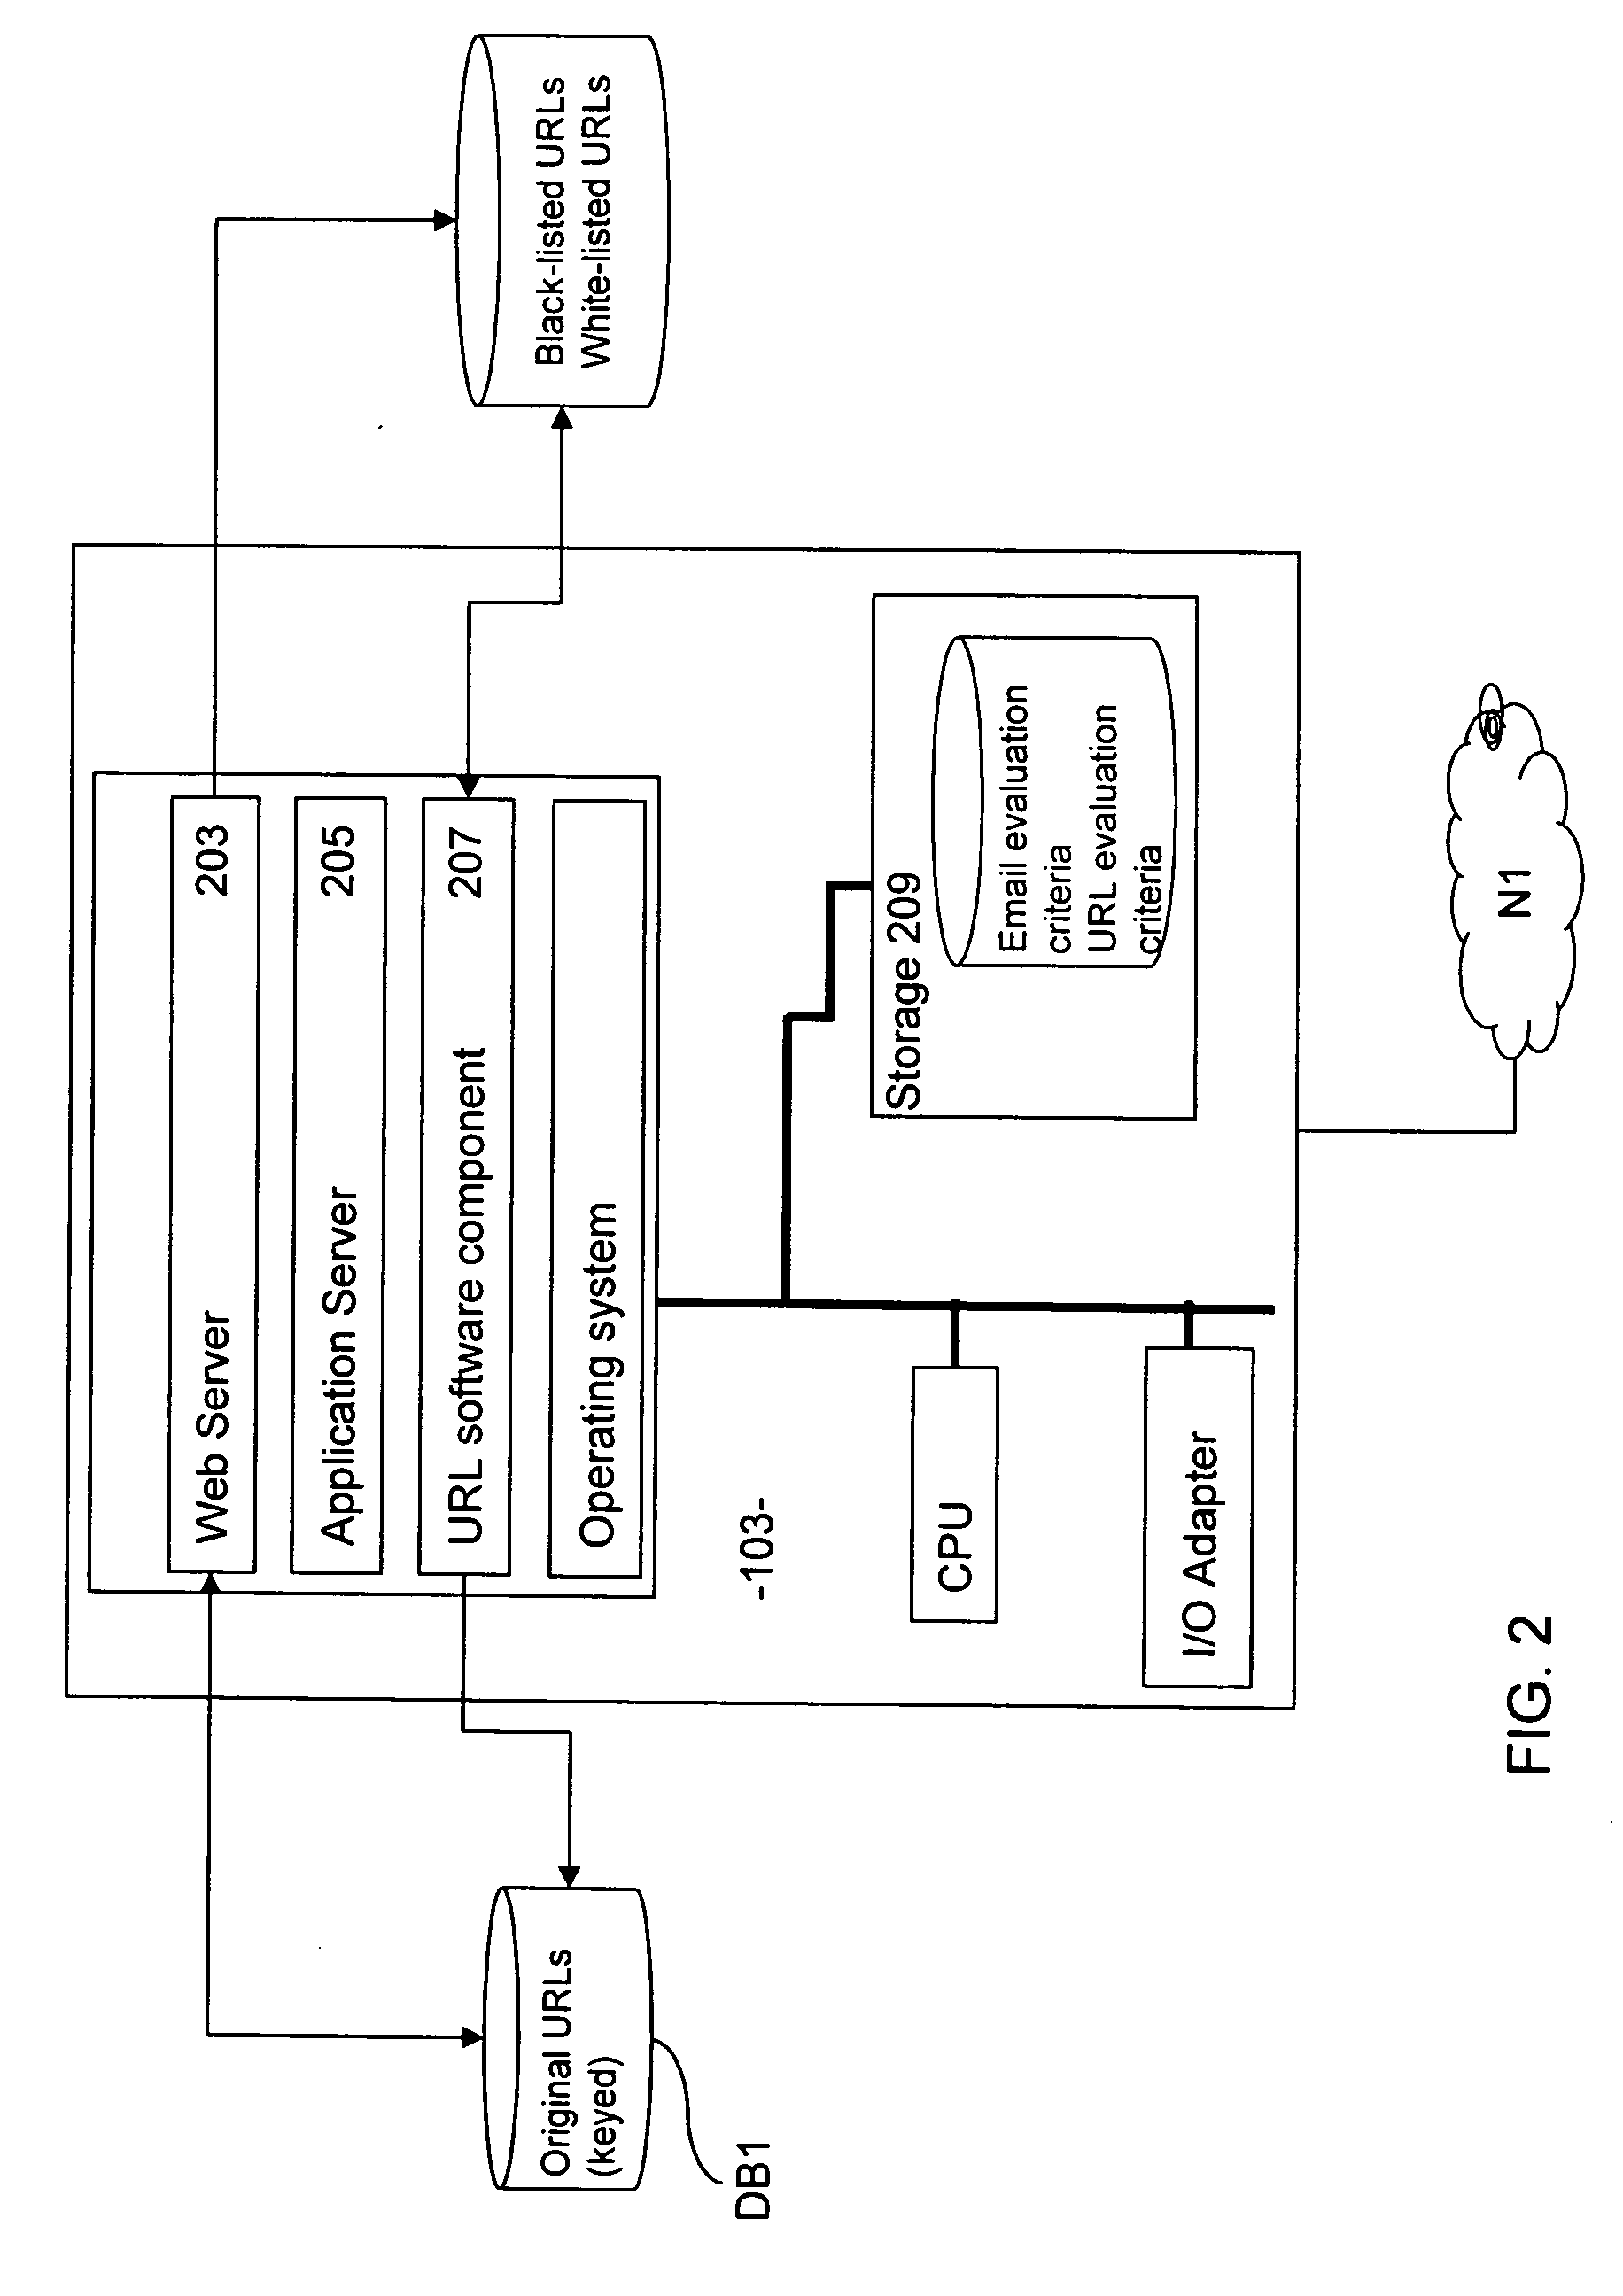 Method and System for Filtering Electronic Messages